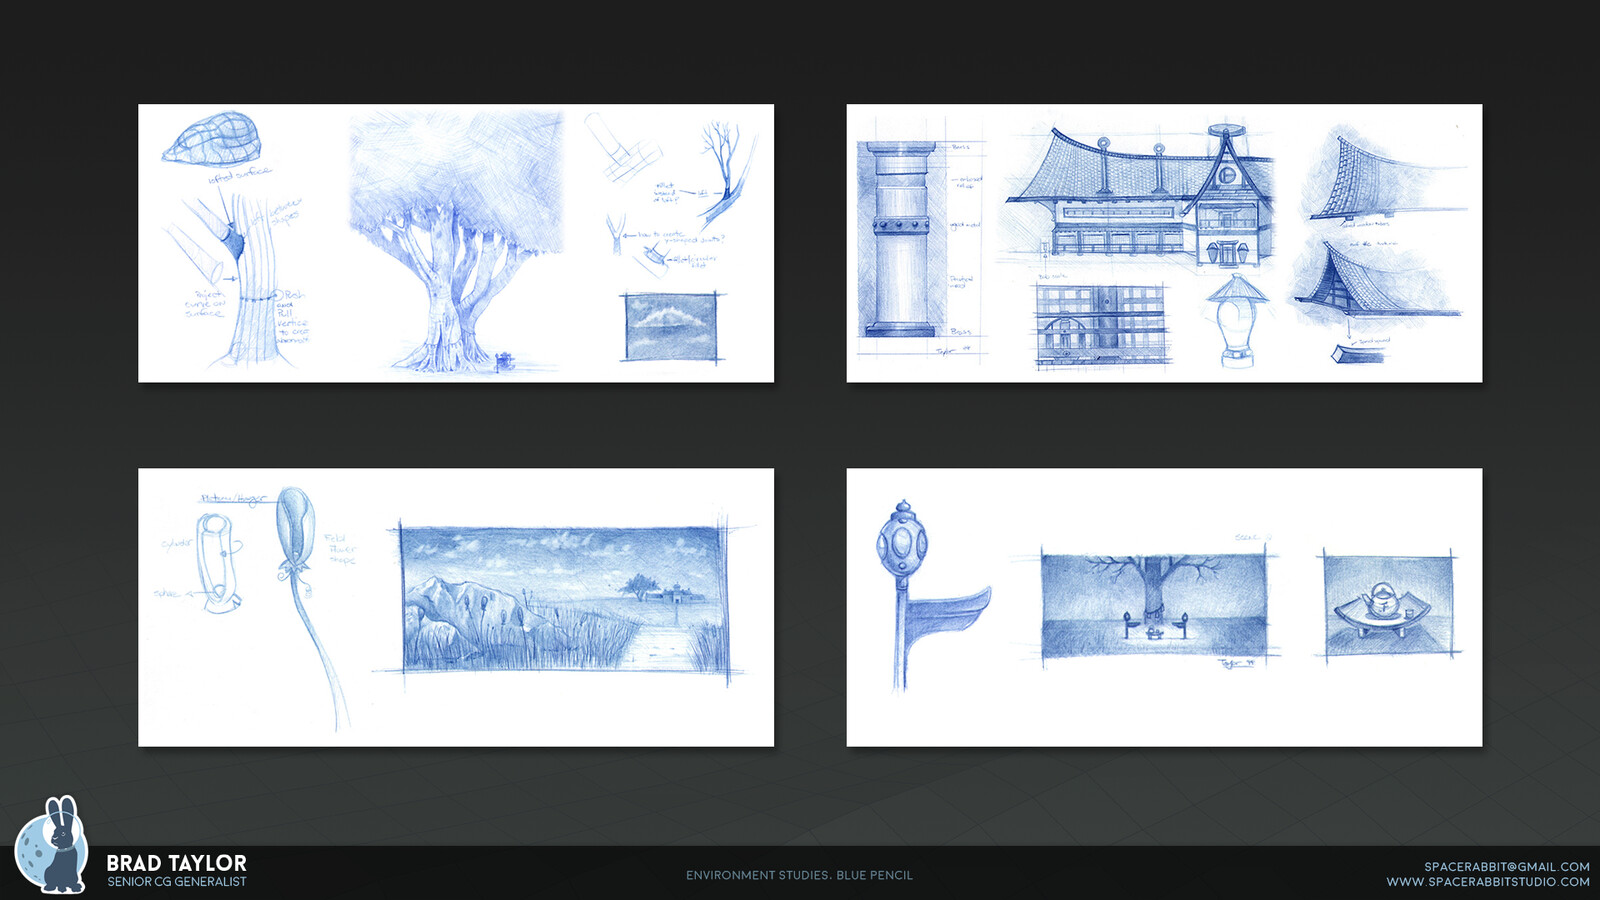 Thesis process drawings